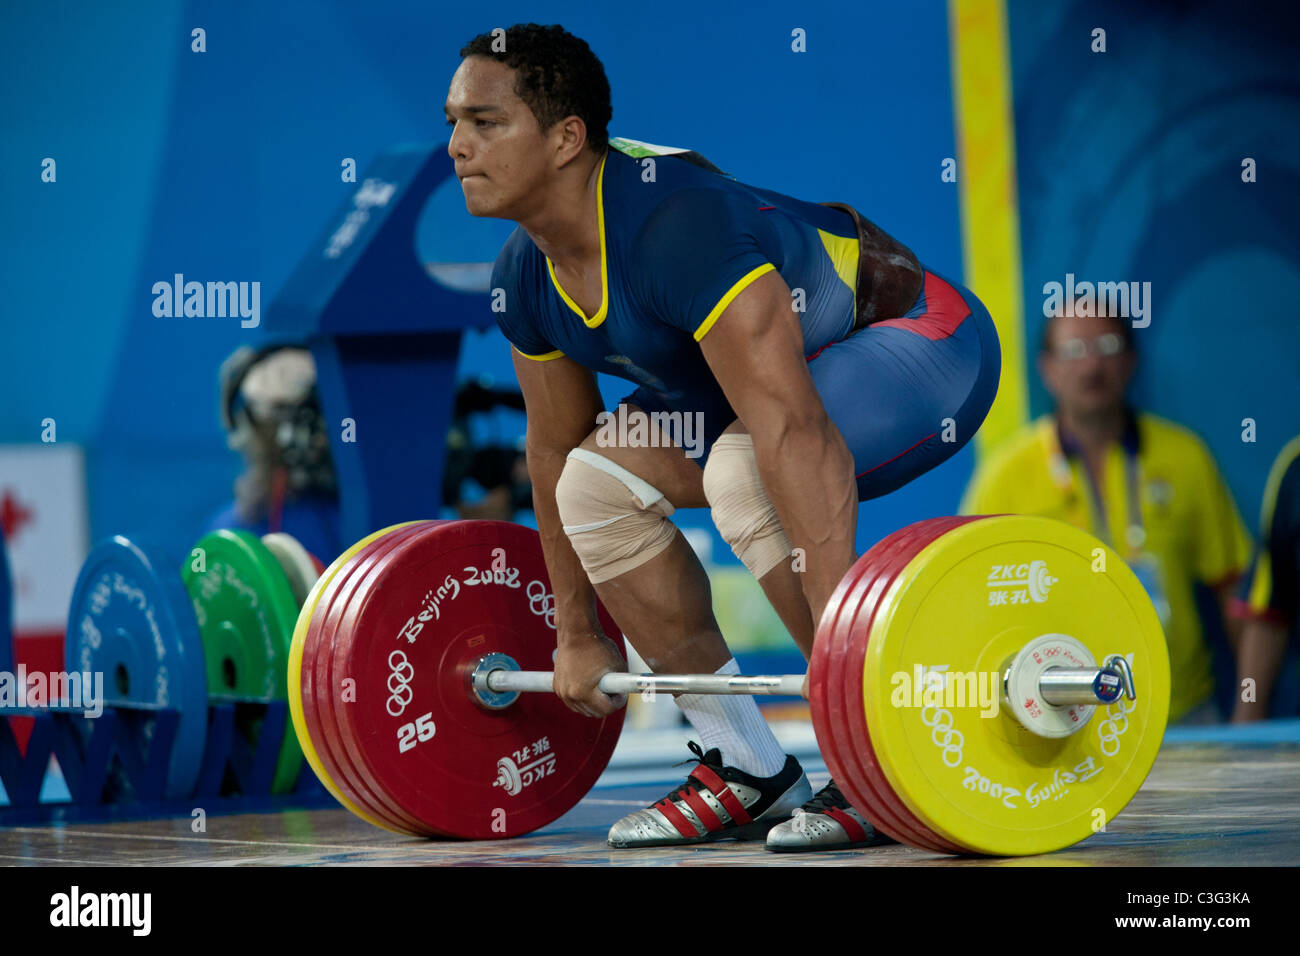 Eduardo Guadamud (ECU) competing in the Weightlifting 94kg class at the 2008 Olympic Summer Games, Beijing, China. Stock Photo